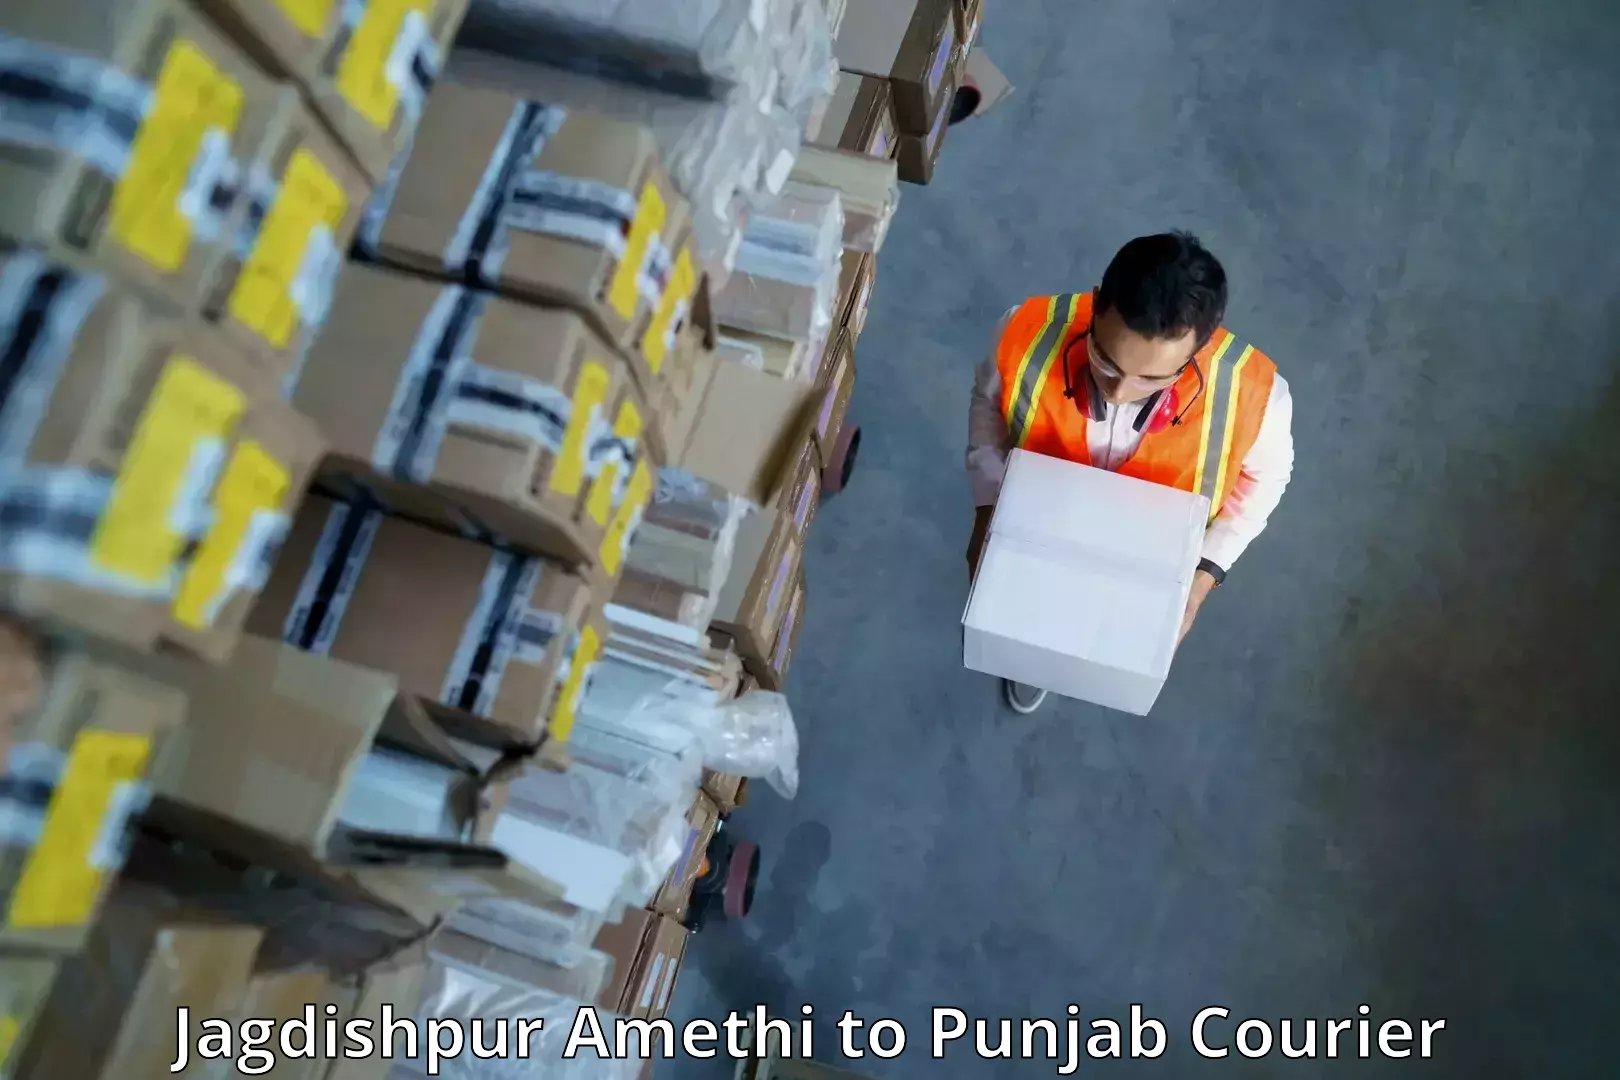 Small business couriers Jagdishpur Amethi to Raikot